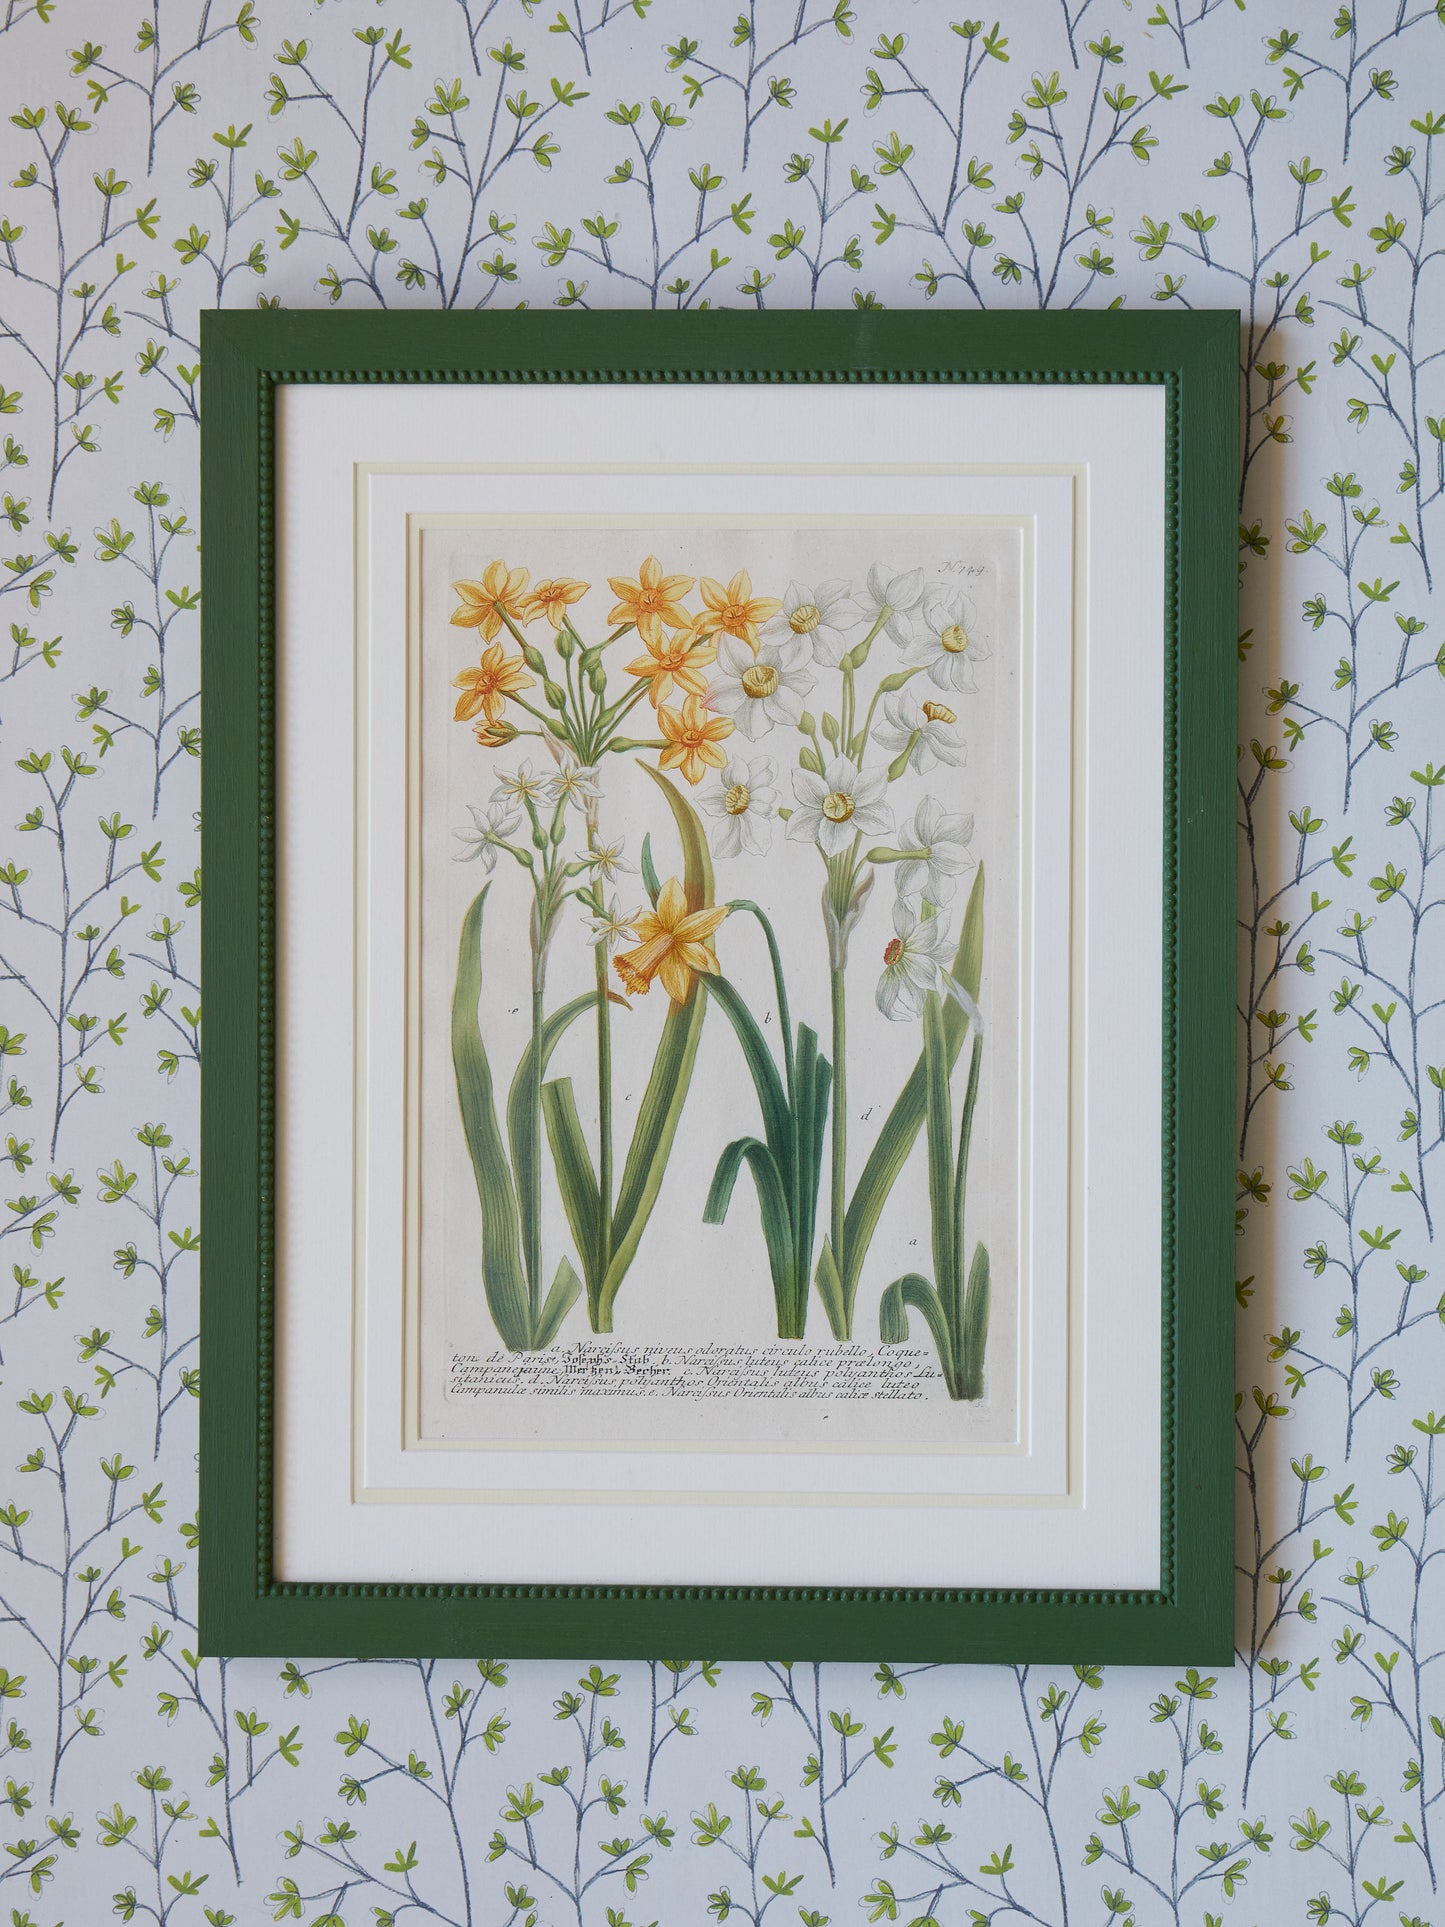 A Set of Early 18th Century Hand-Coloured Engravings of Narcissi by Johann Weinmann